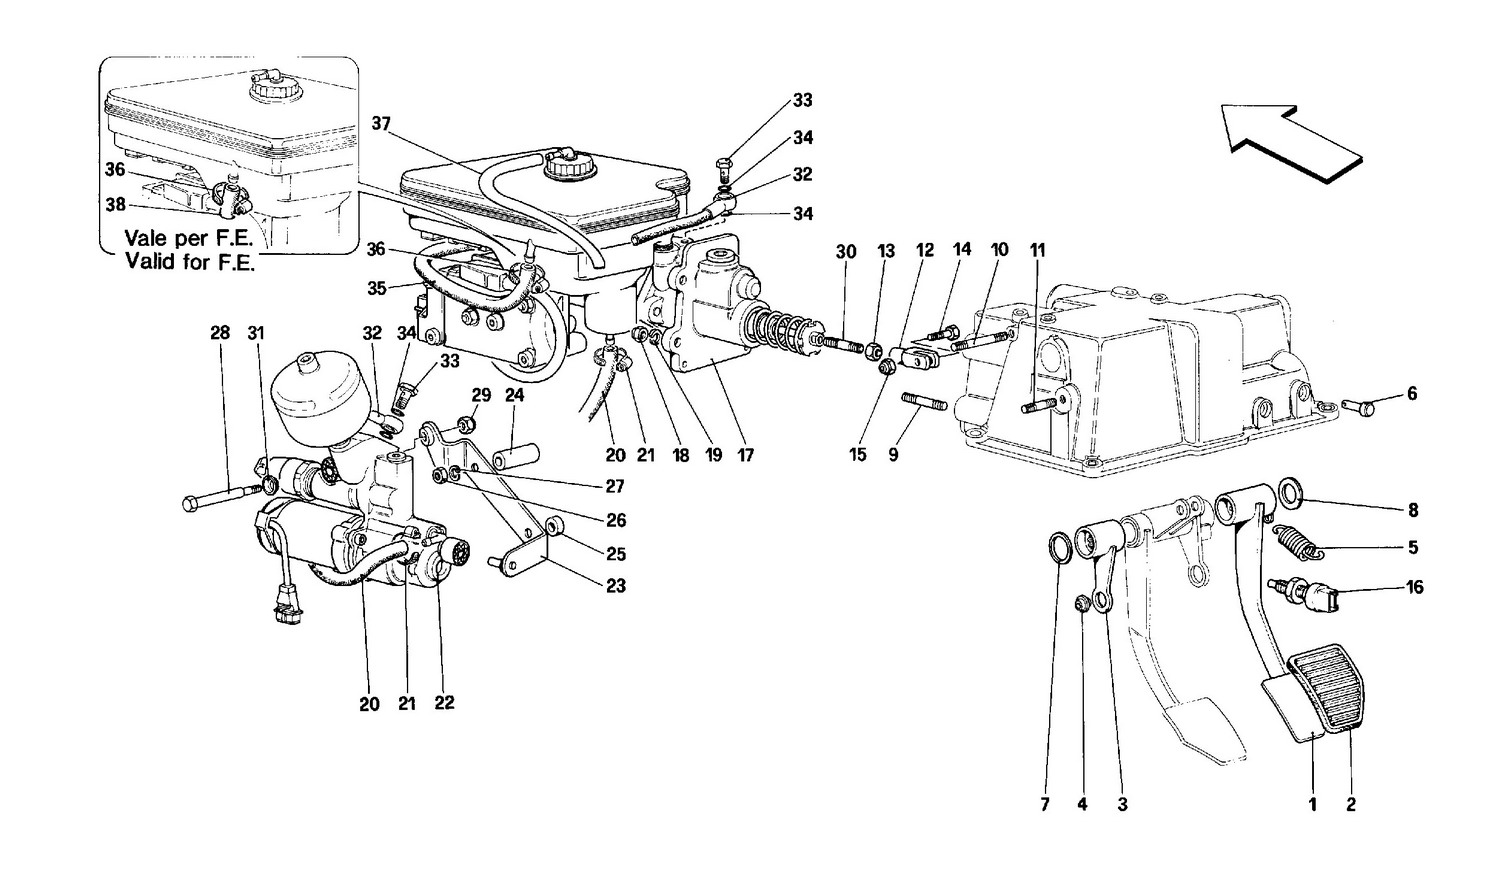 Schematic: Brake Hydraulic System -Valid For Gs